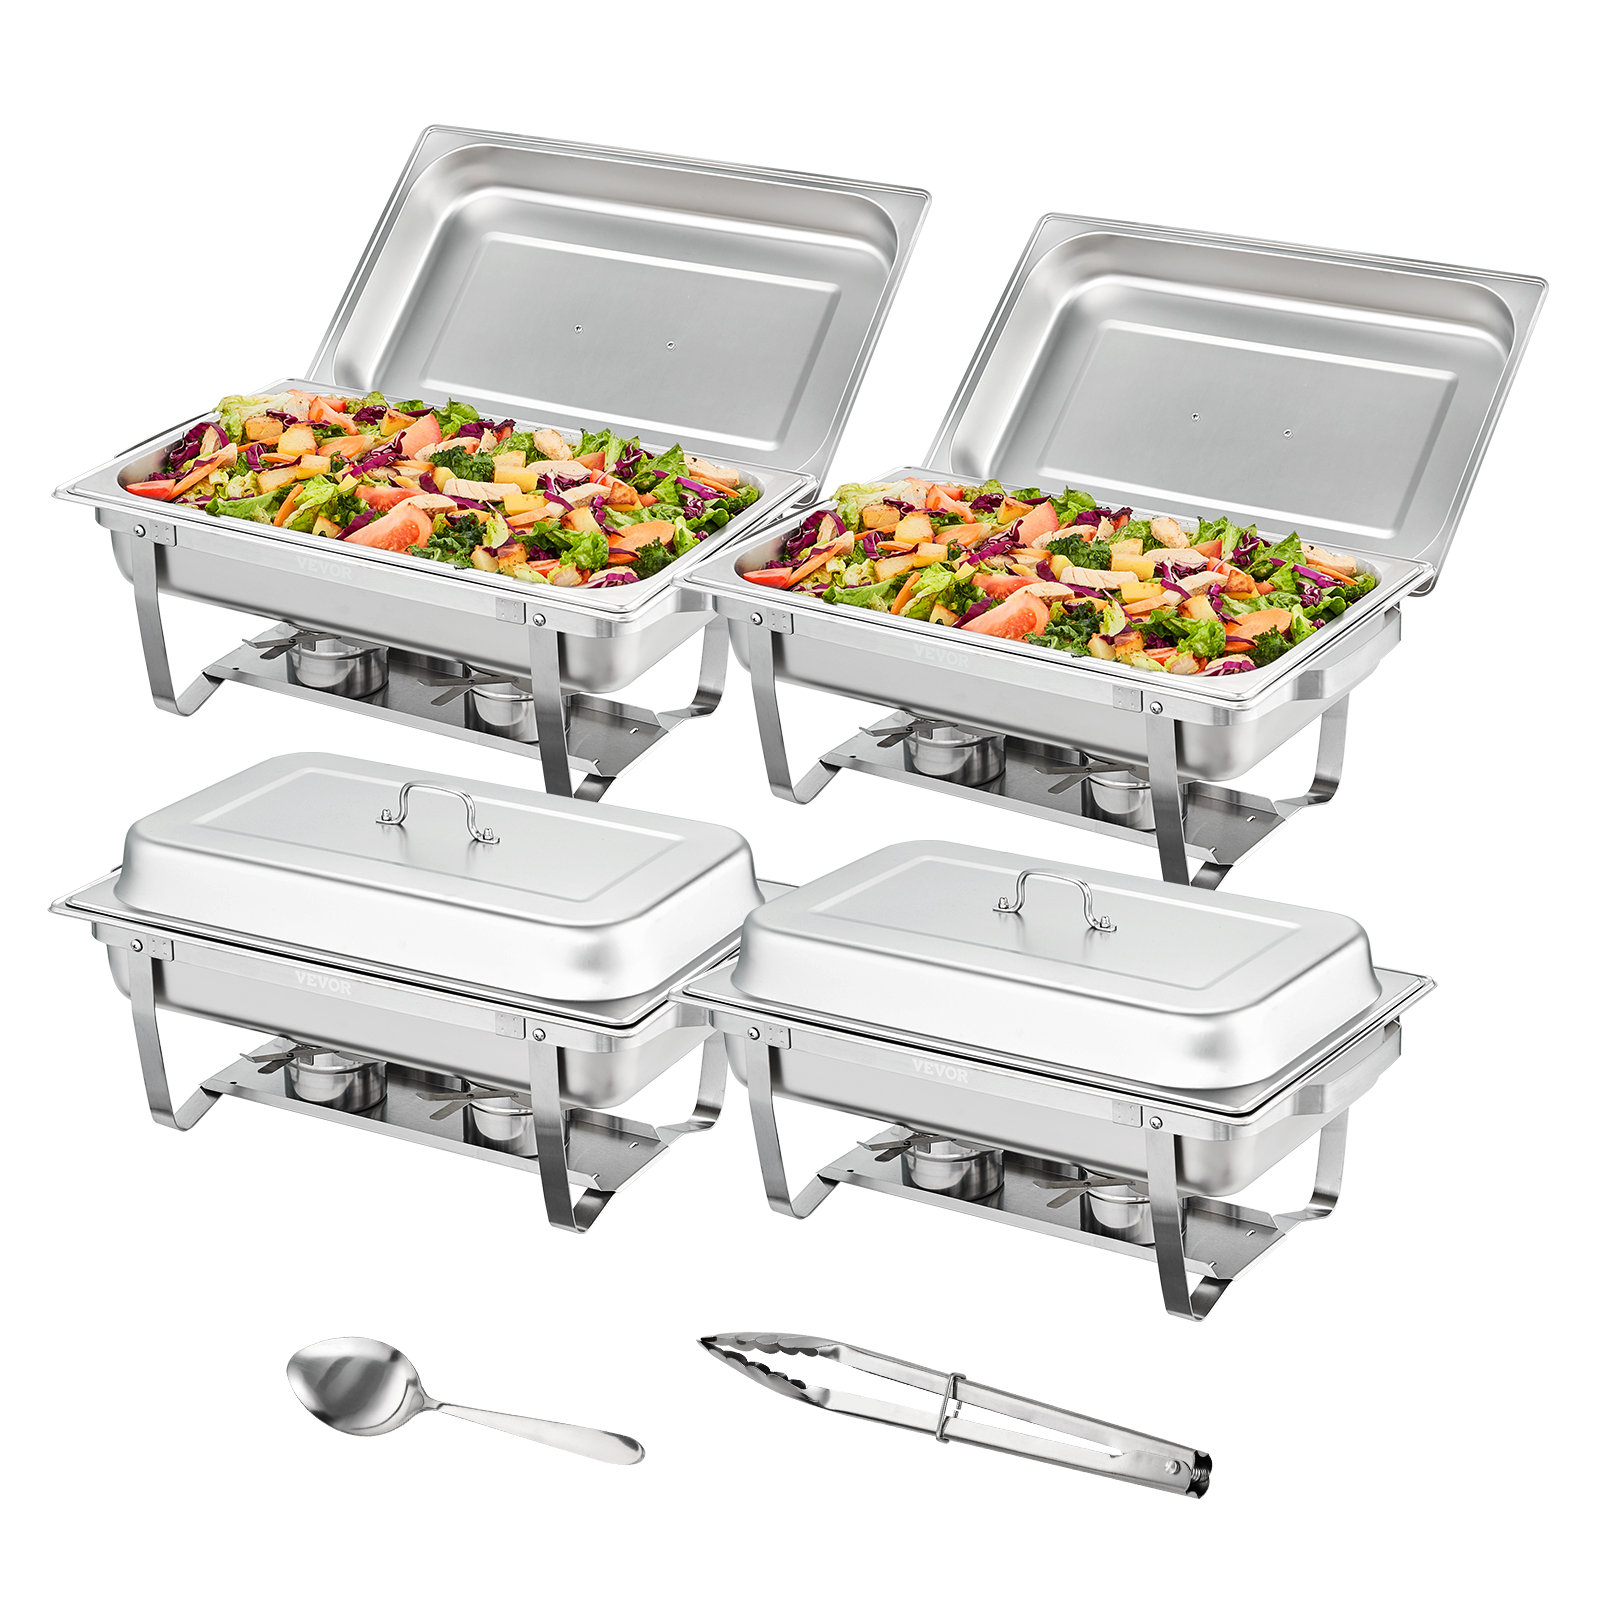 Disposable Chafing Dish Buffet Set - 39 Piece Food Warmers for Parties  Buffet Se